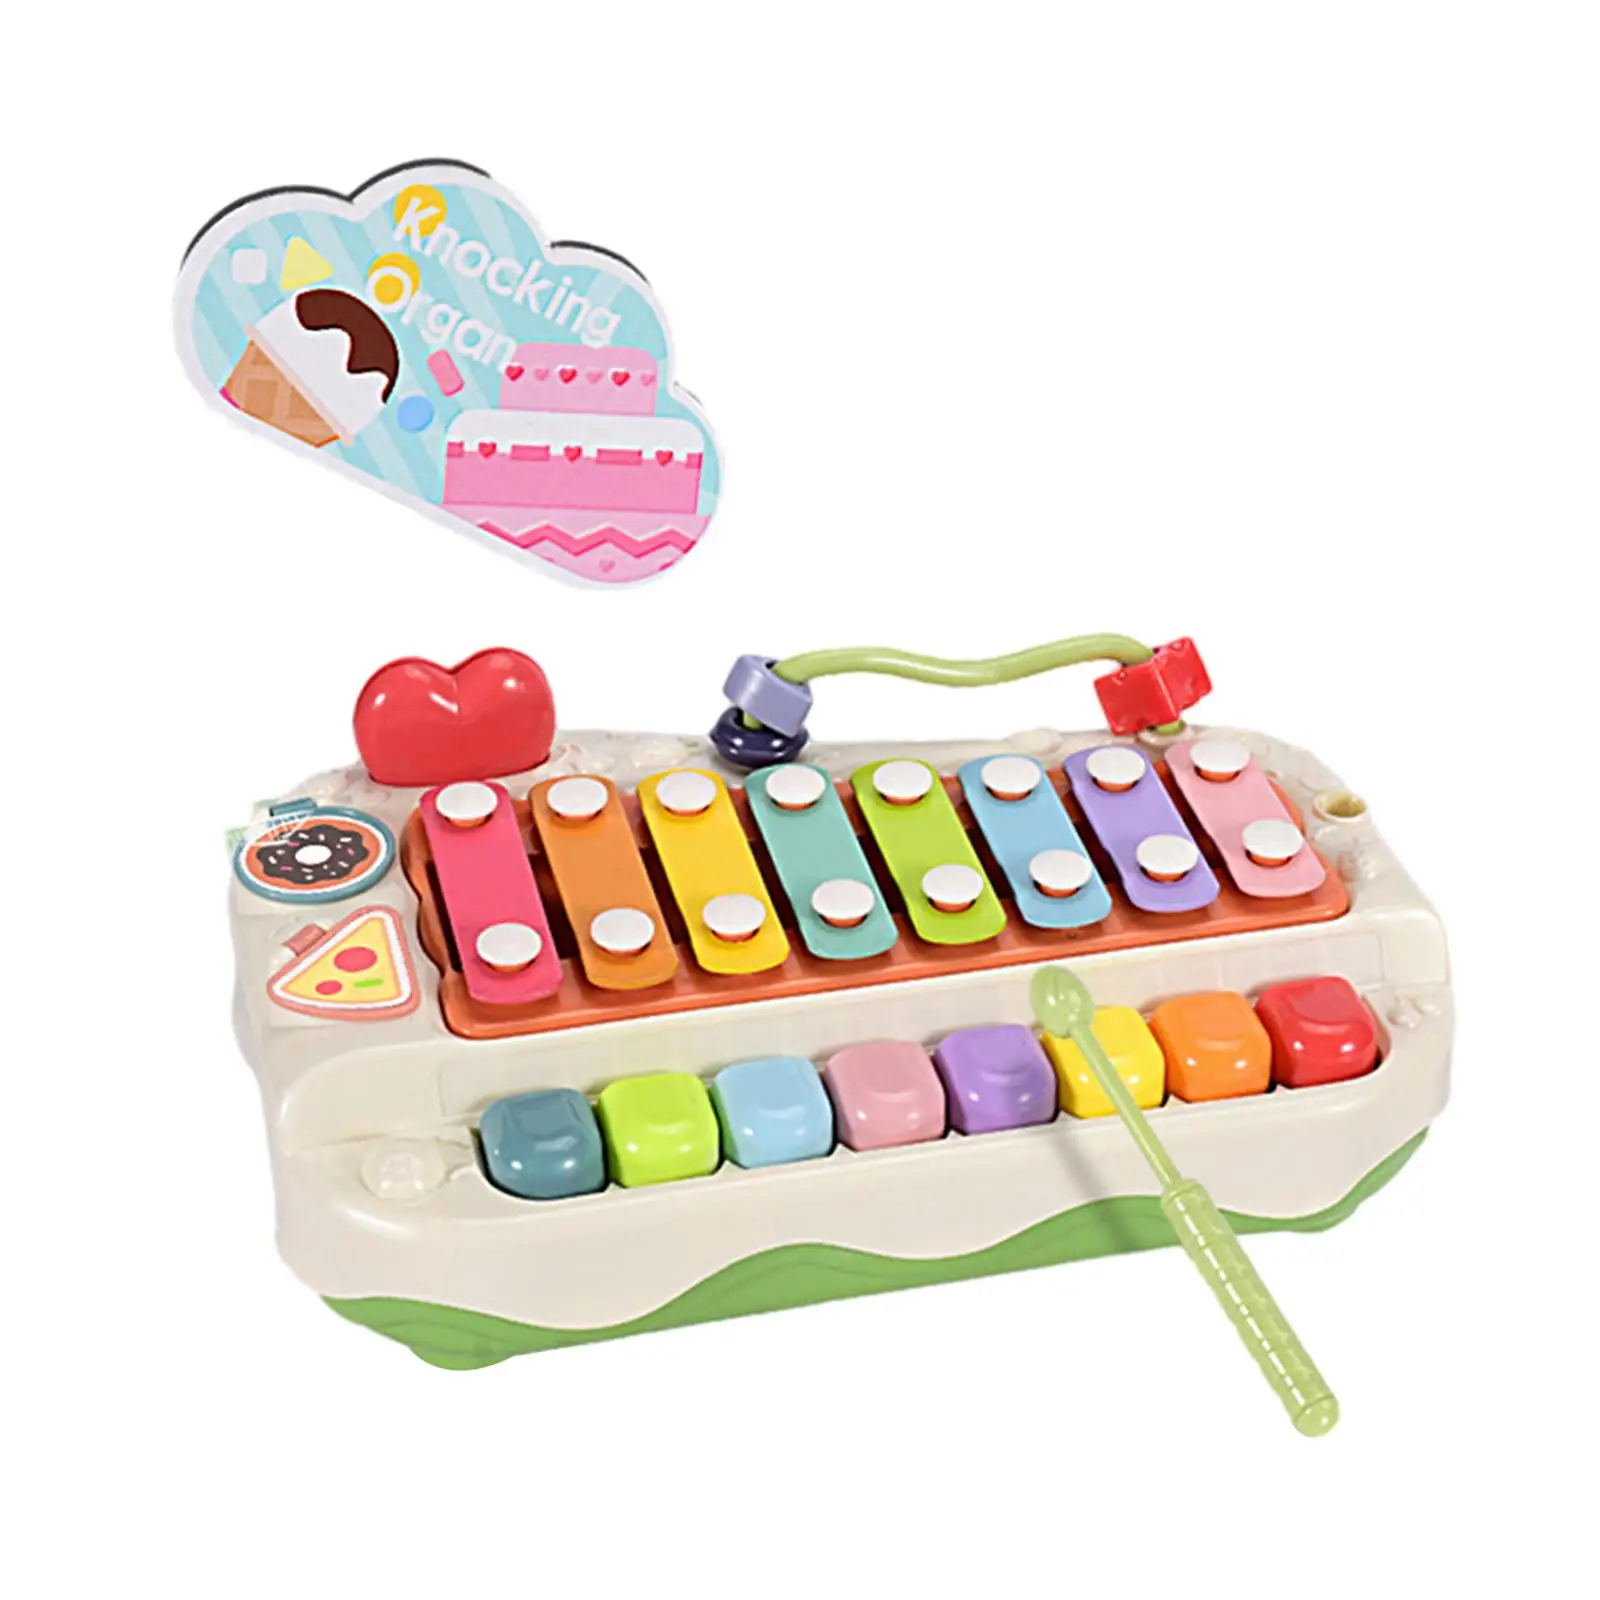 Musical Toy Multicolored Motor Skills Preschool Hand Knocking Piano for Boy Girls 1 2 3 Years Old Kids Toddler Holiday Gifts